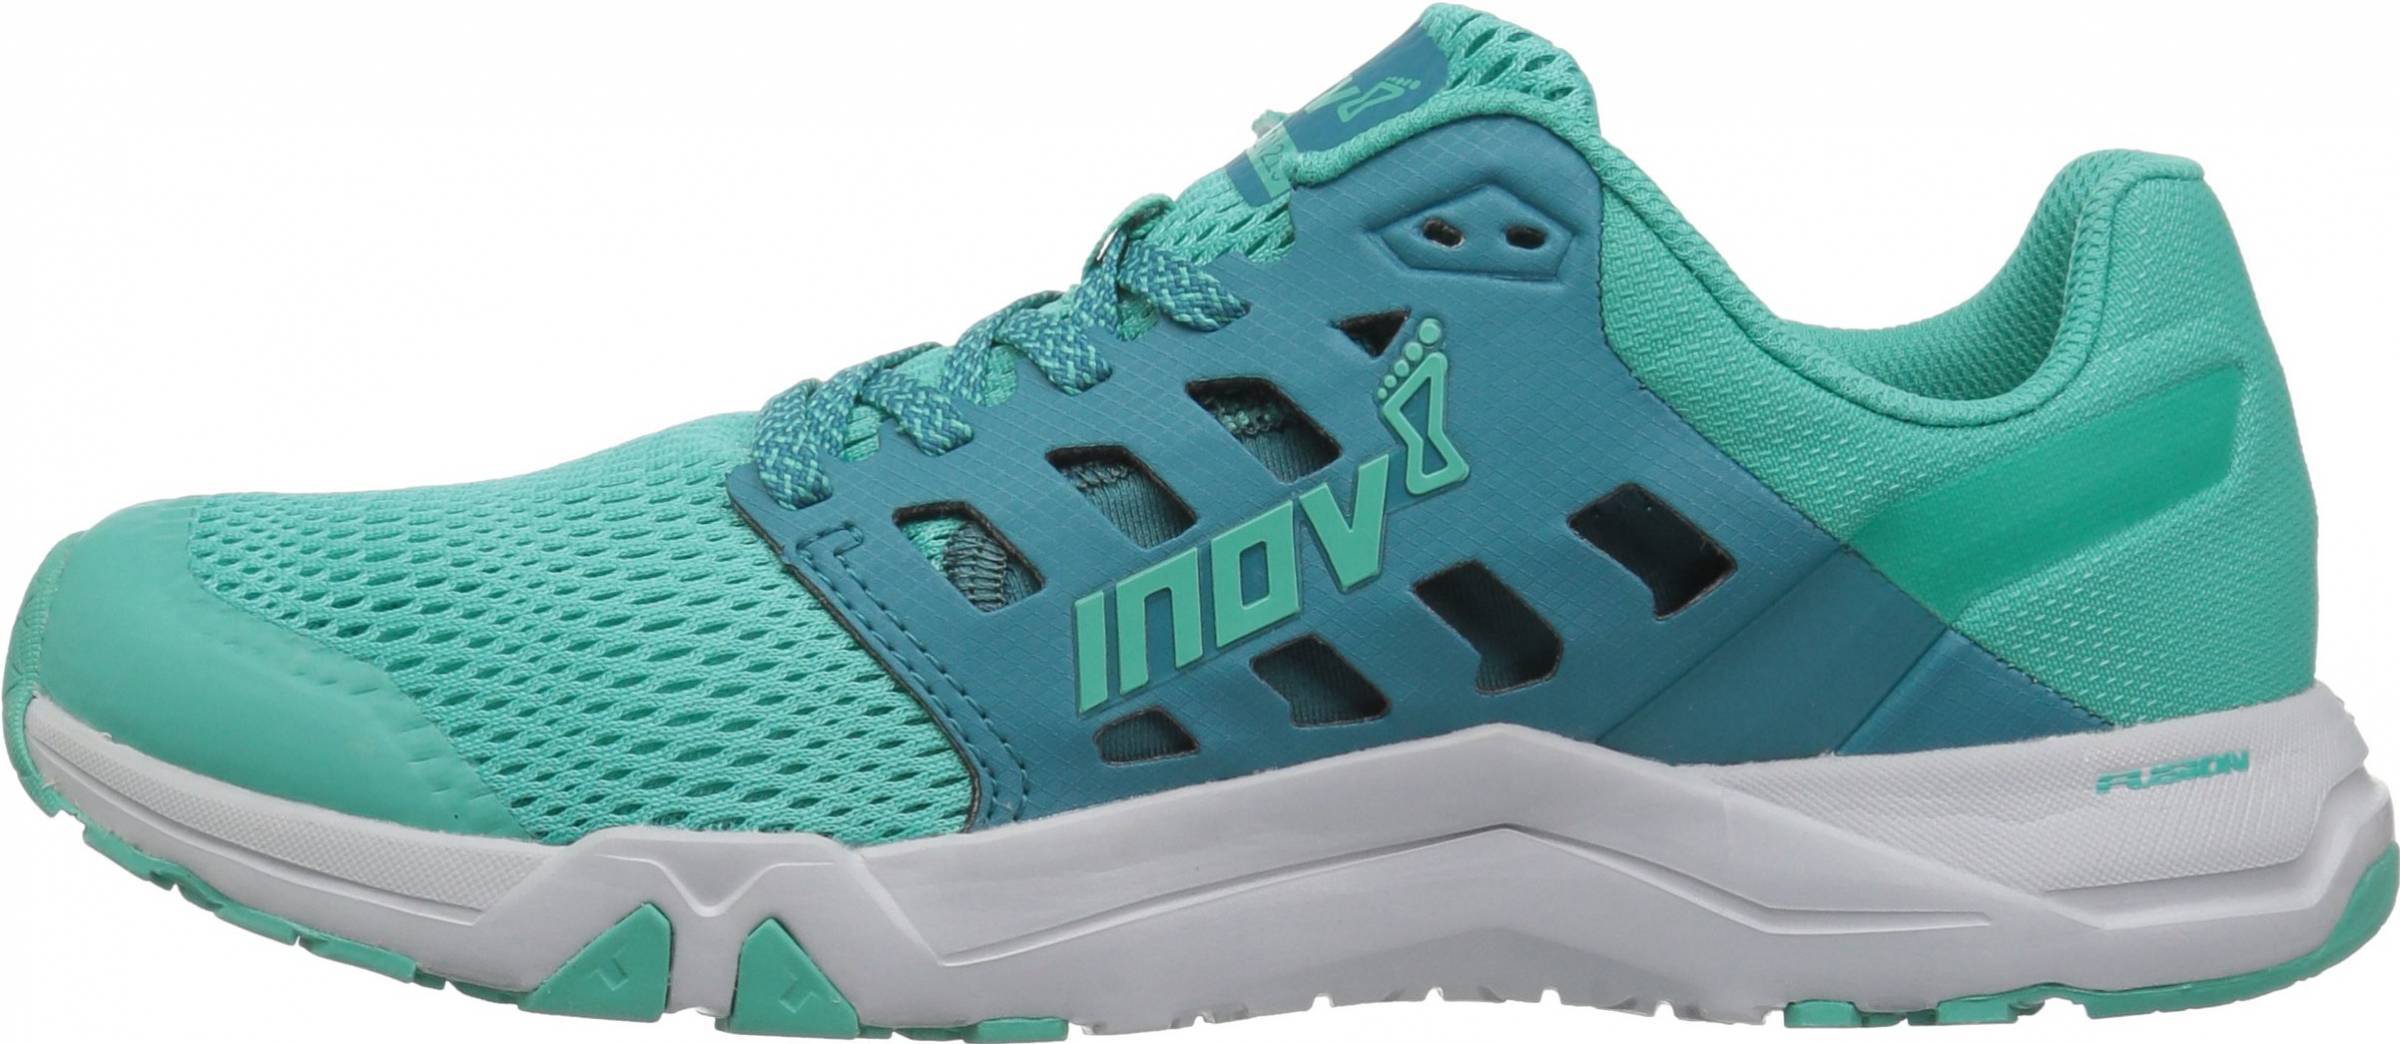 Details about   Inov8 All Train 215 Mens Training Shoes Blue